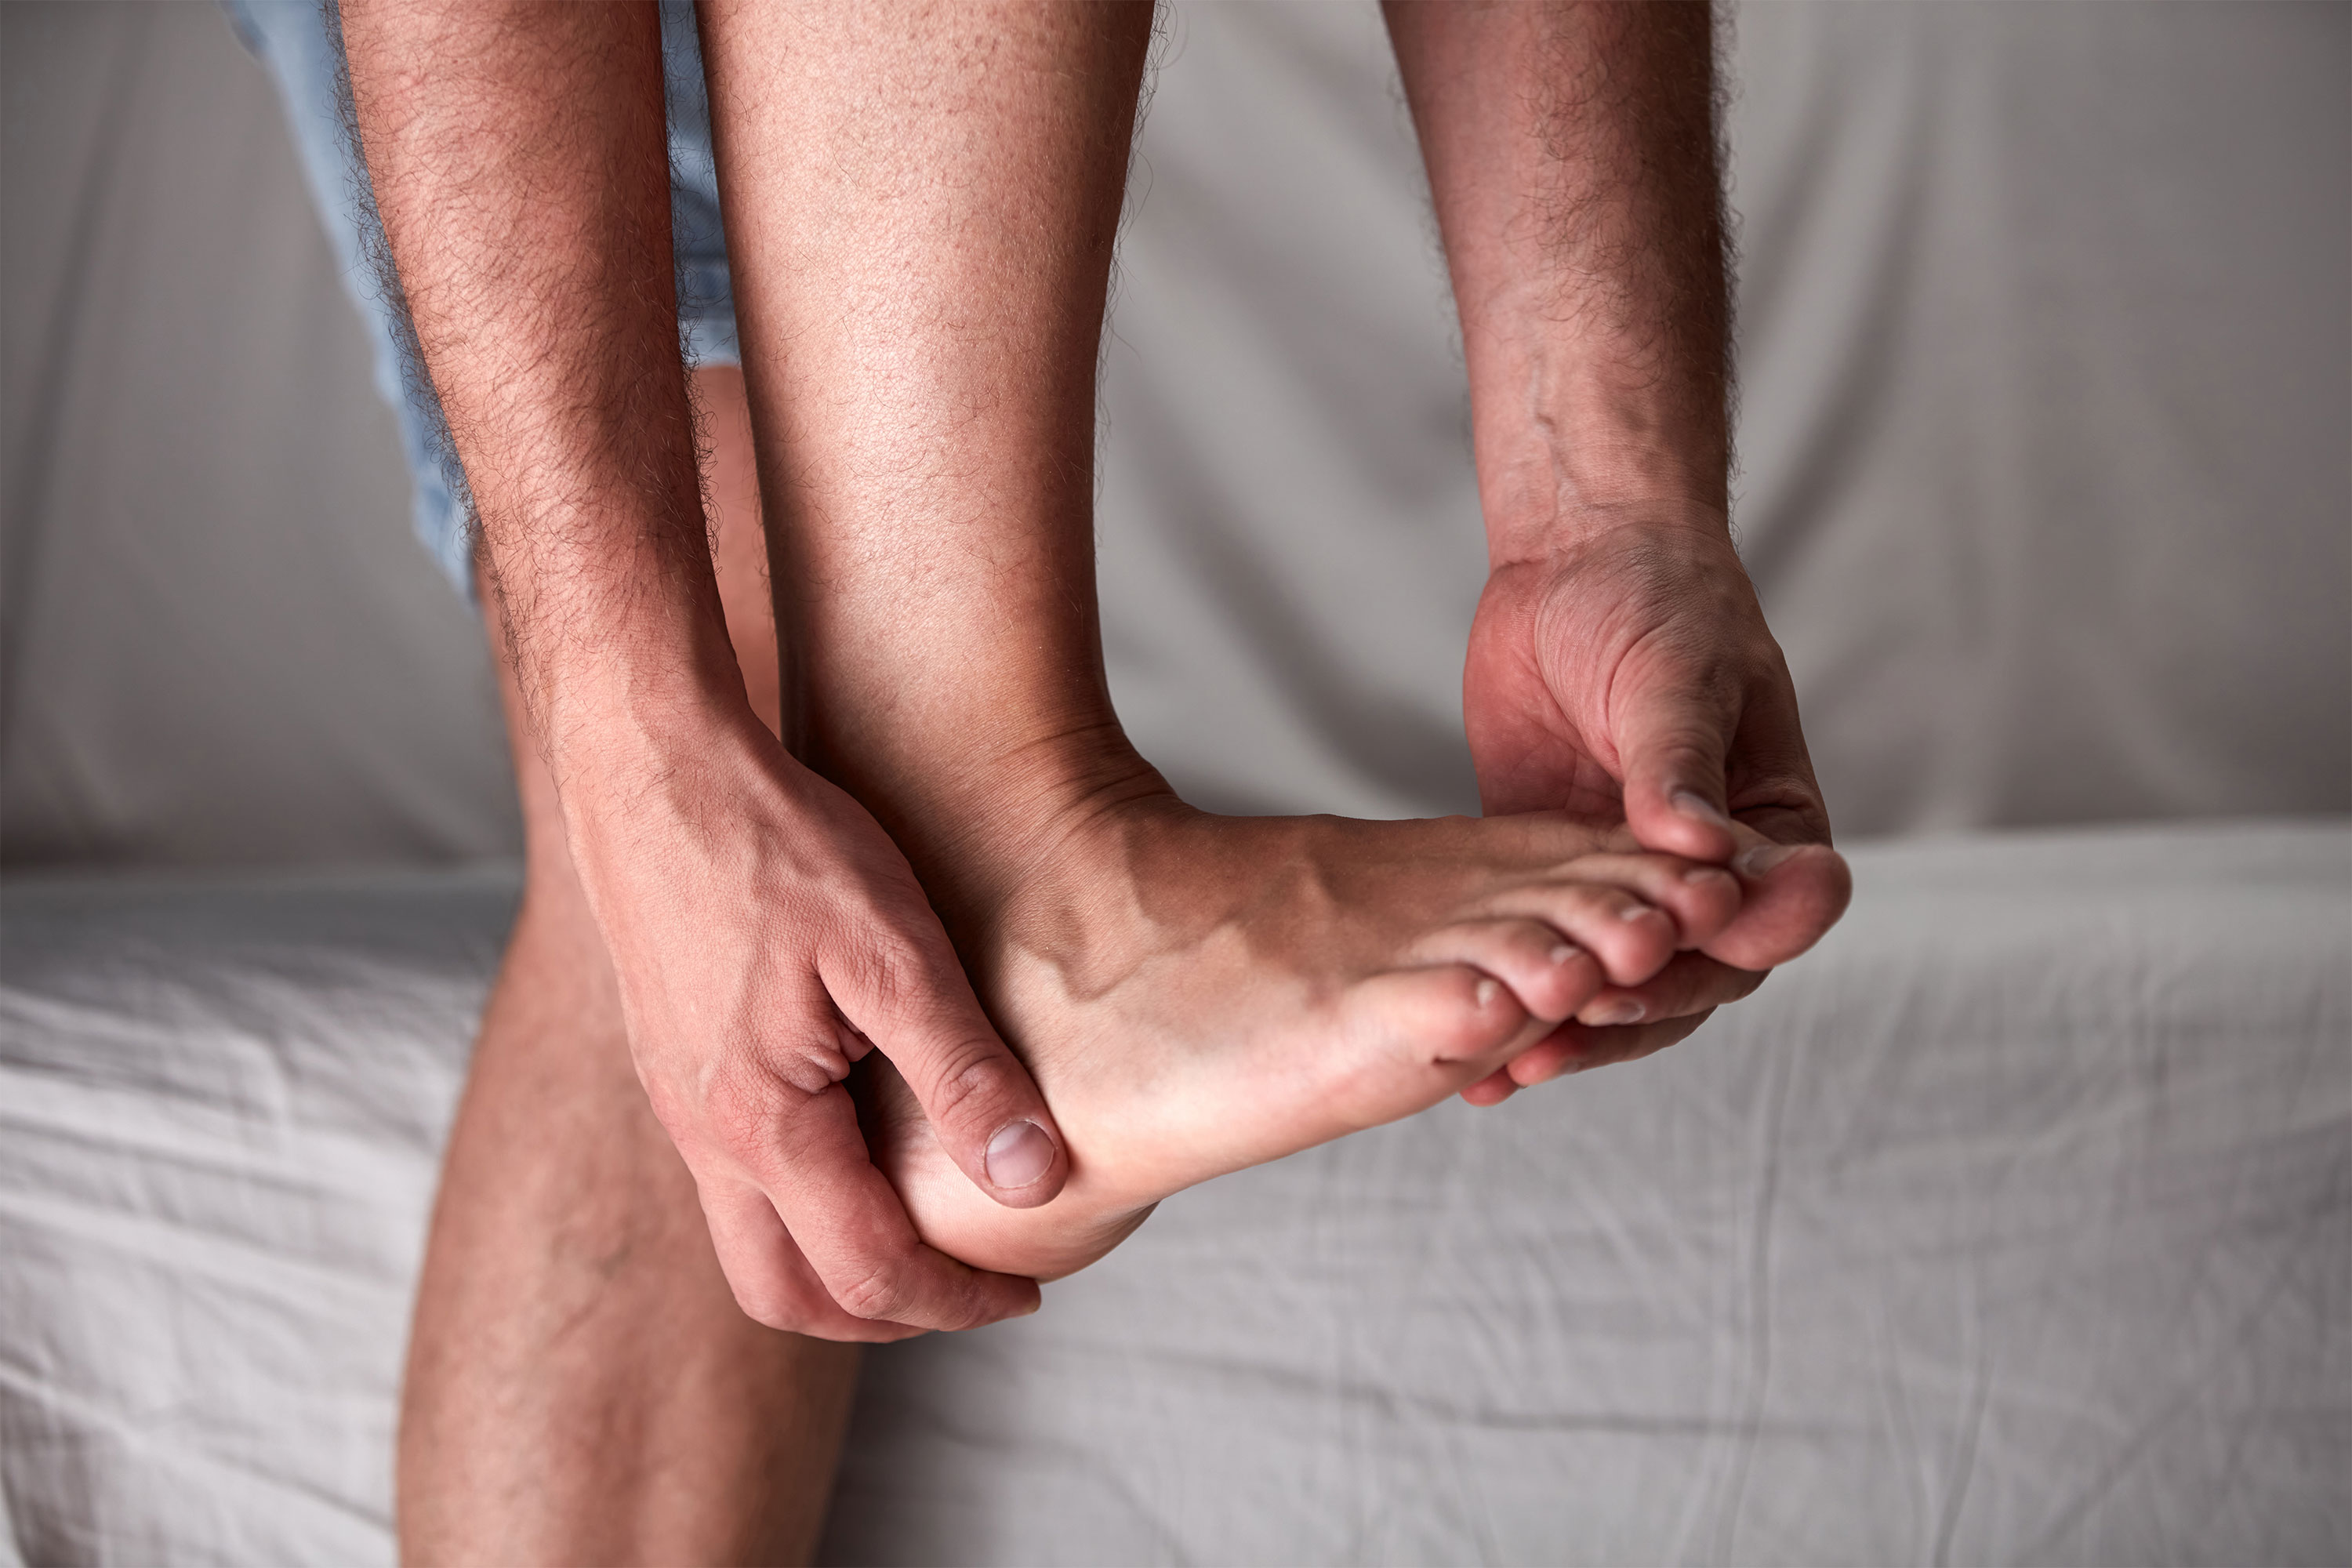 Heel Pain When Stretching: Causes and Treatments - Custom